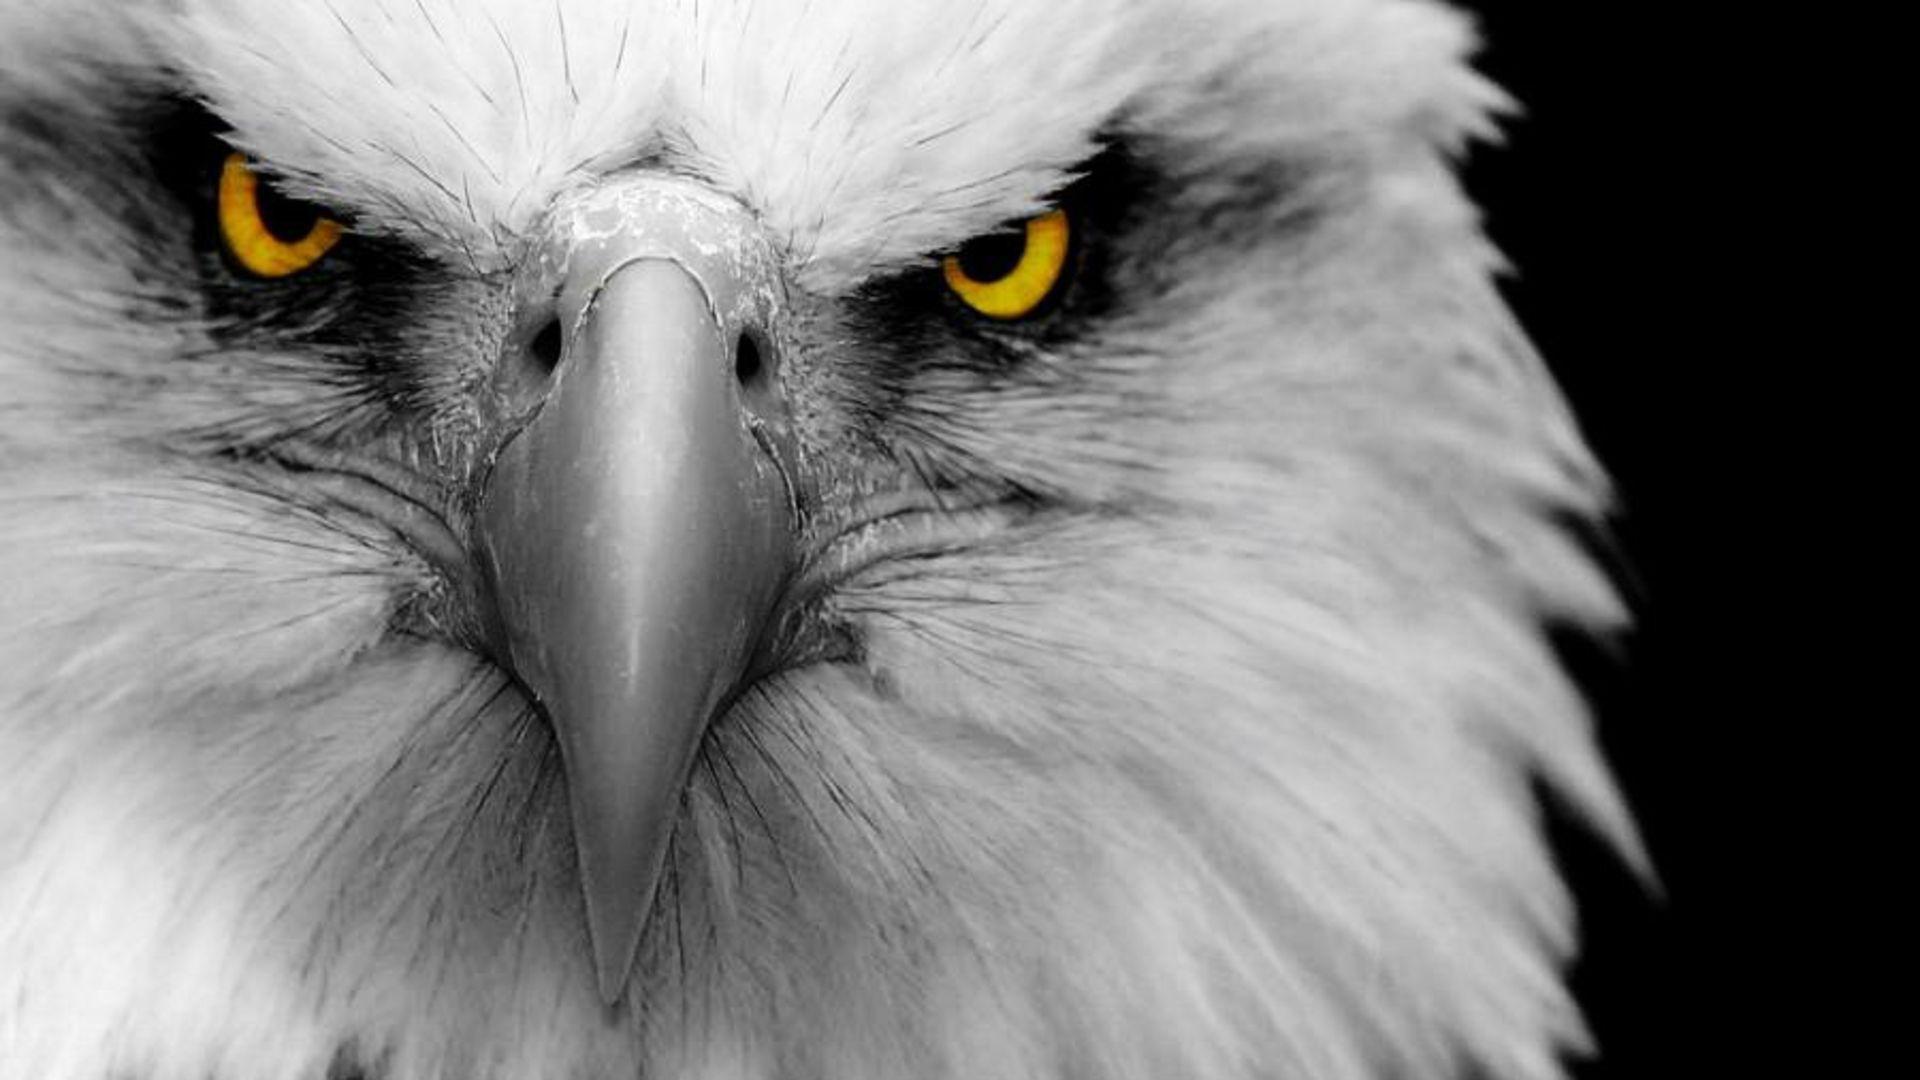 Eagles 4K Ultra HD Wallpapers - Top Free Eagles 4K Ultra HD Backgrounds